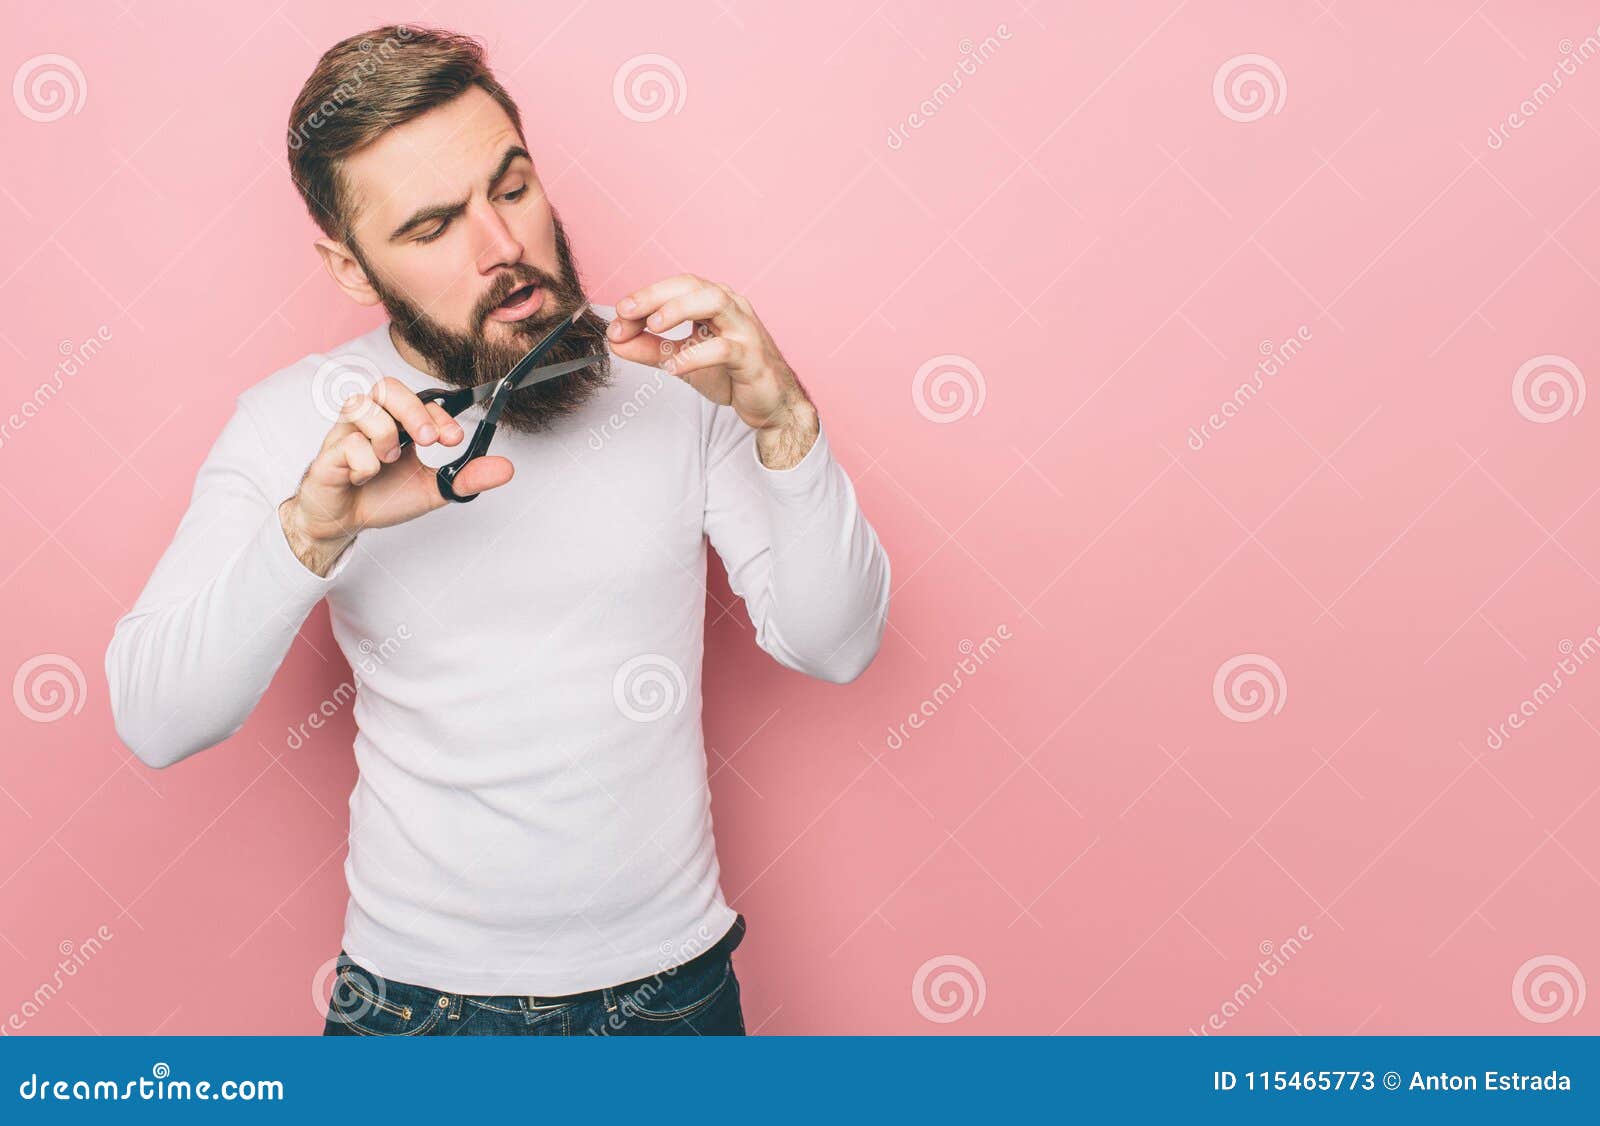 A Picture of Guy that Cuts His Beard with the Scissors. he is Doing ...